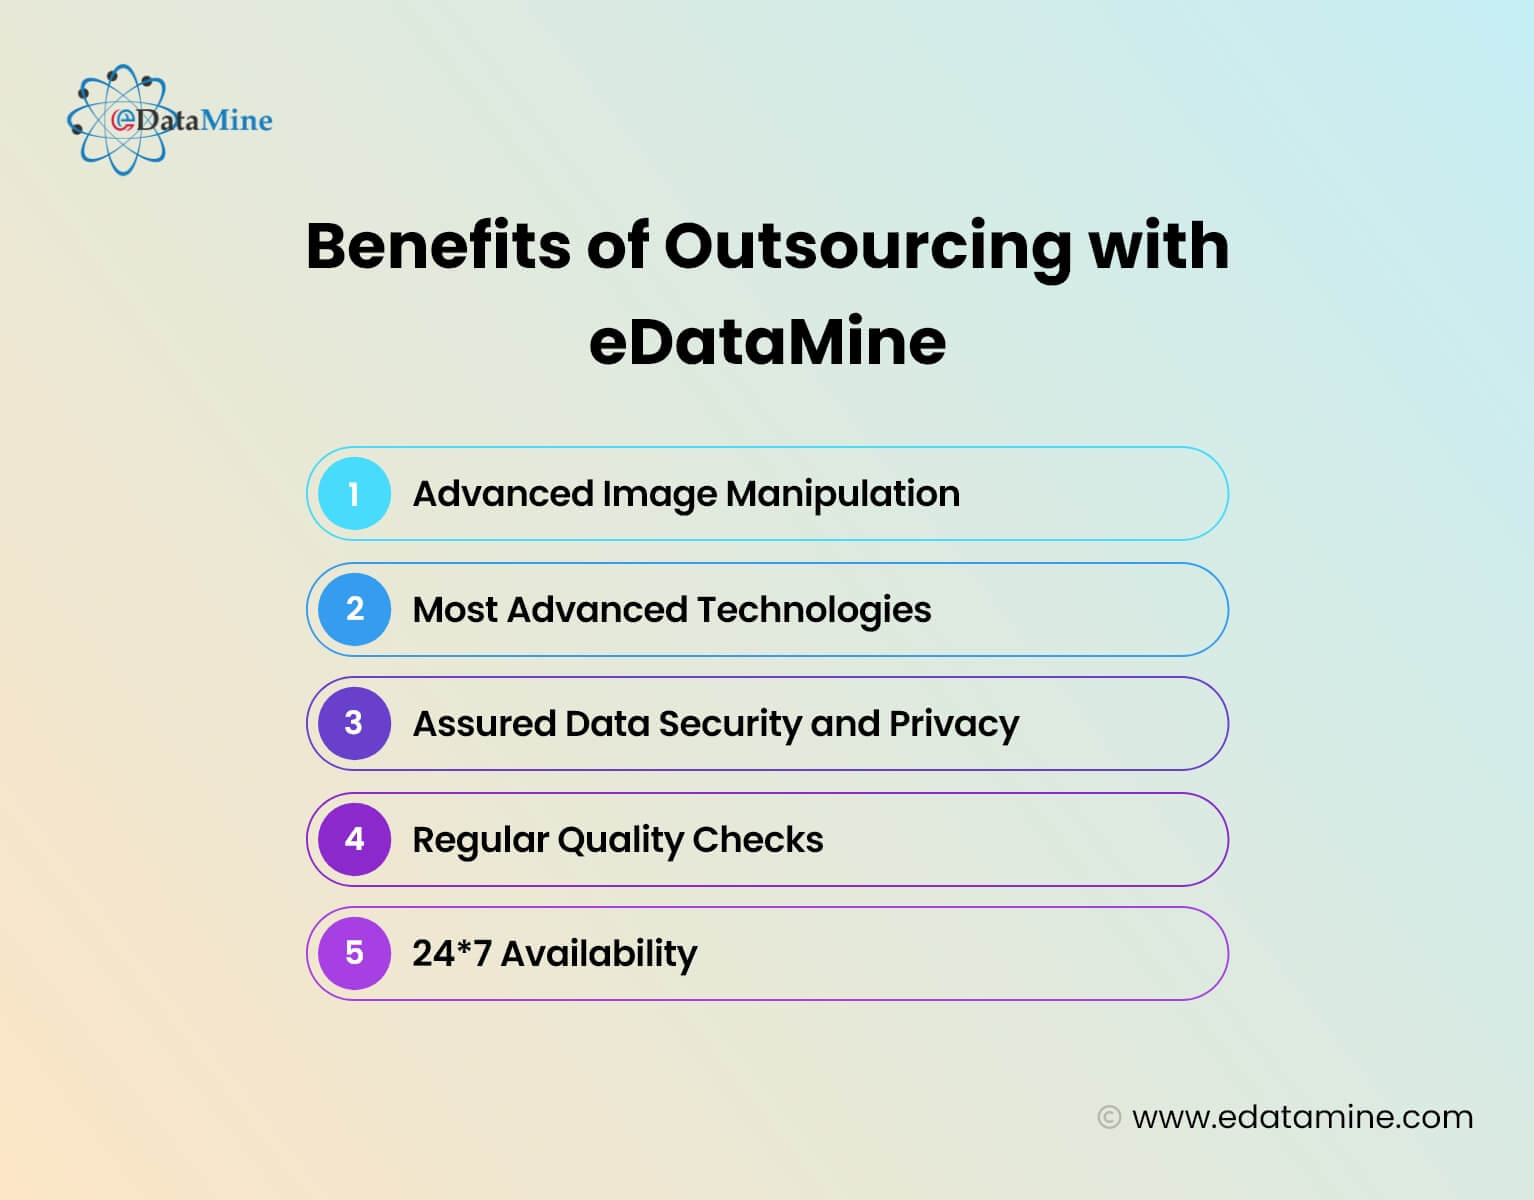 Benefits of Outsourcing with eDataMine